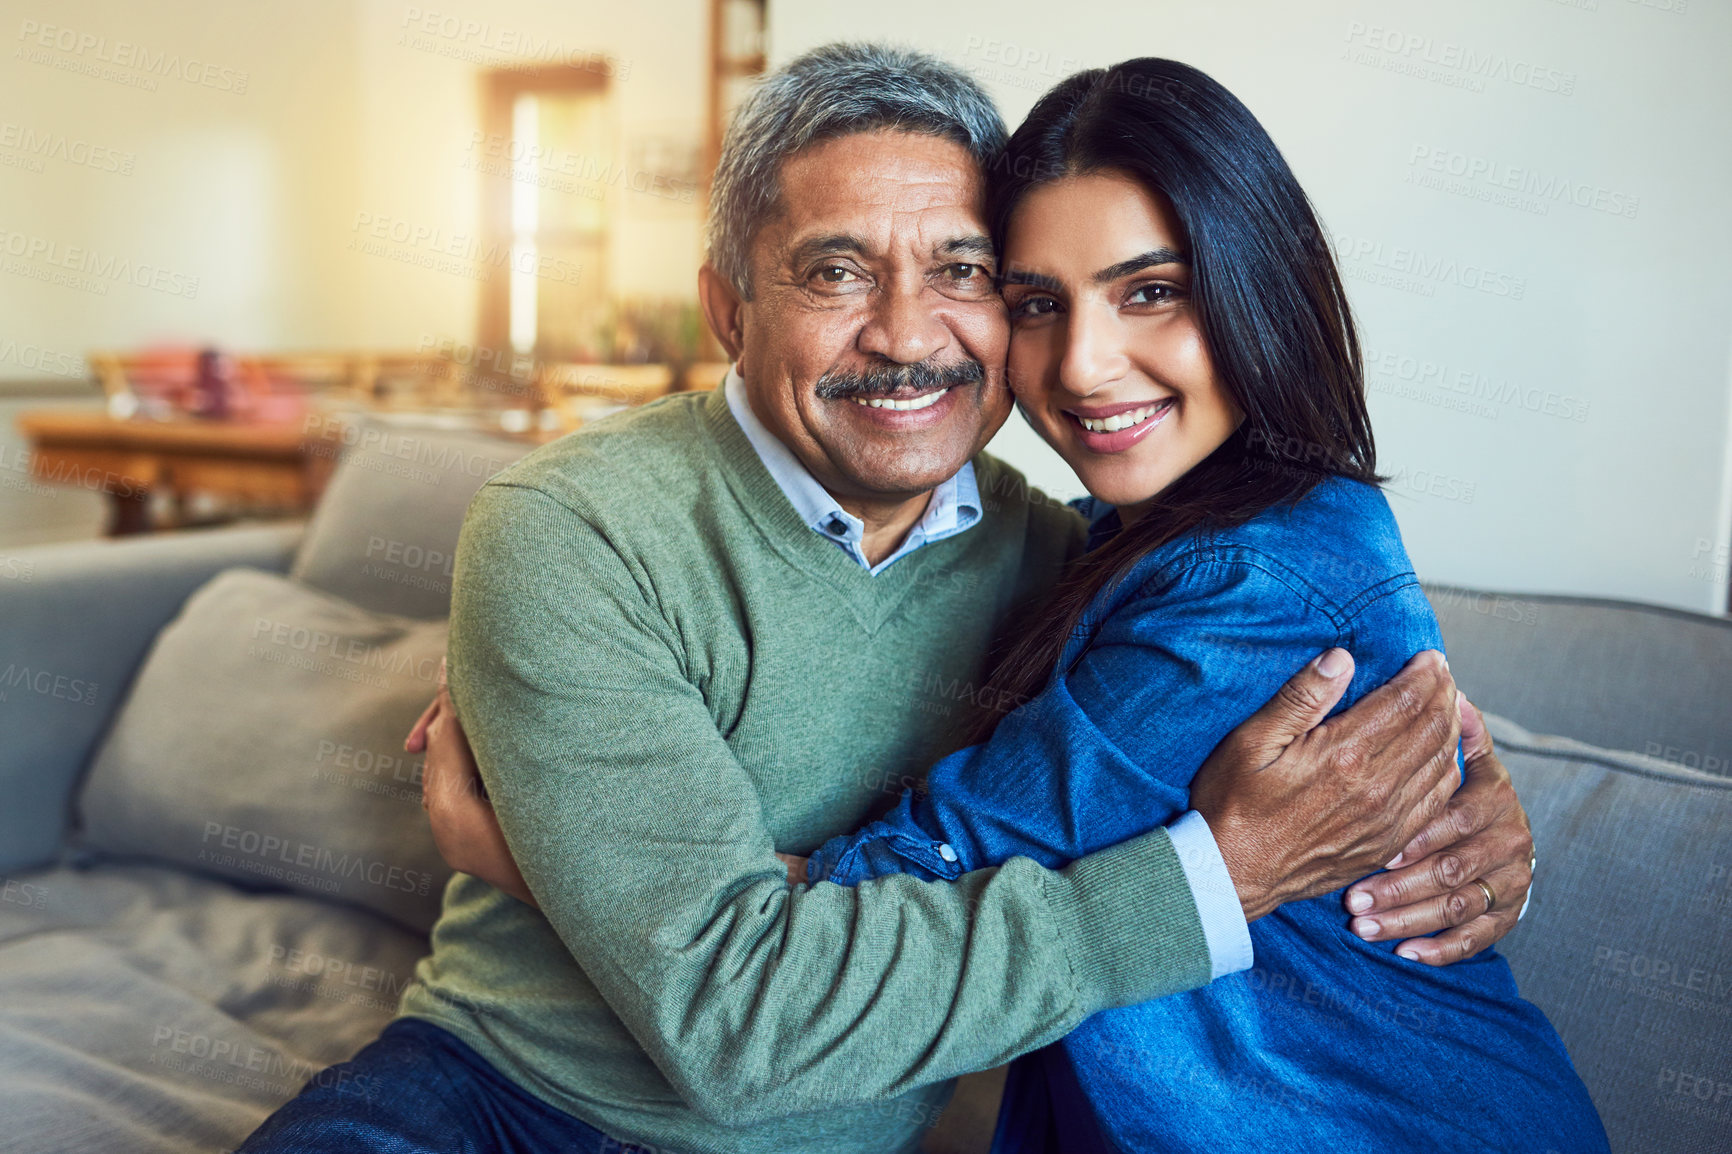 Buy stock photo Portrait of a cheerful senior man posing with his daughter while relaxing on a couch at home